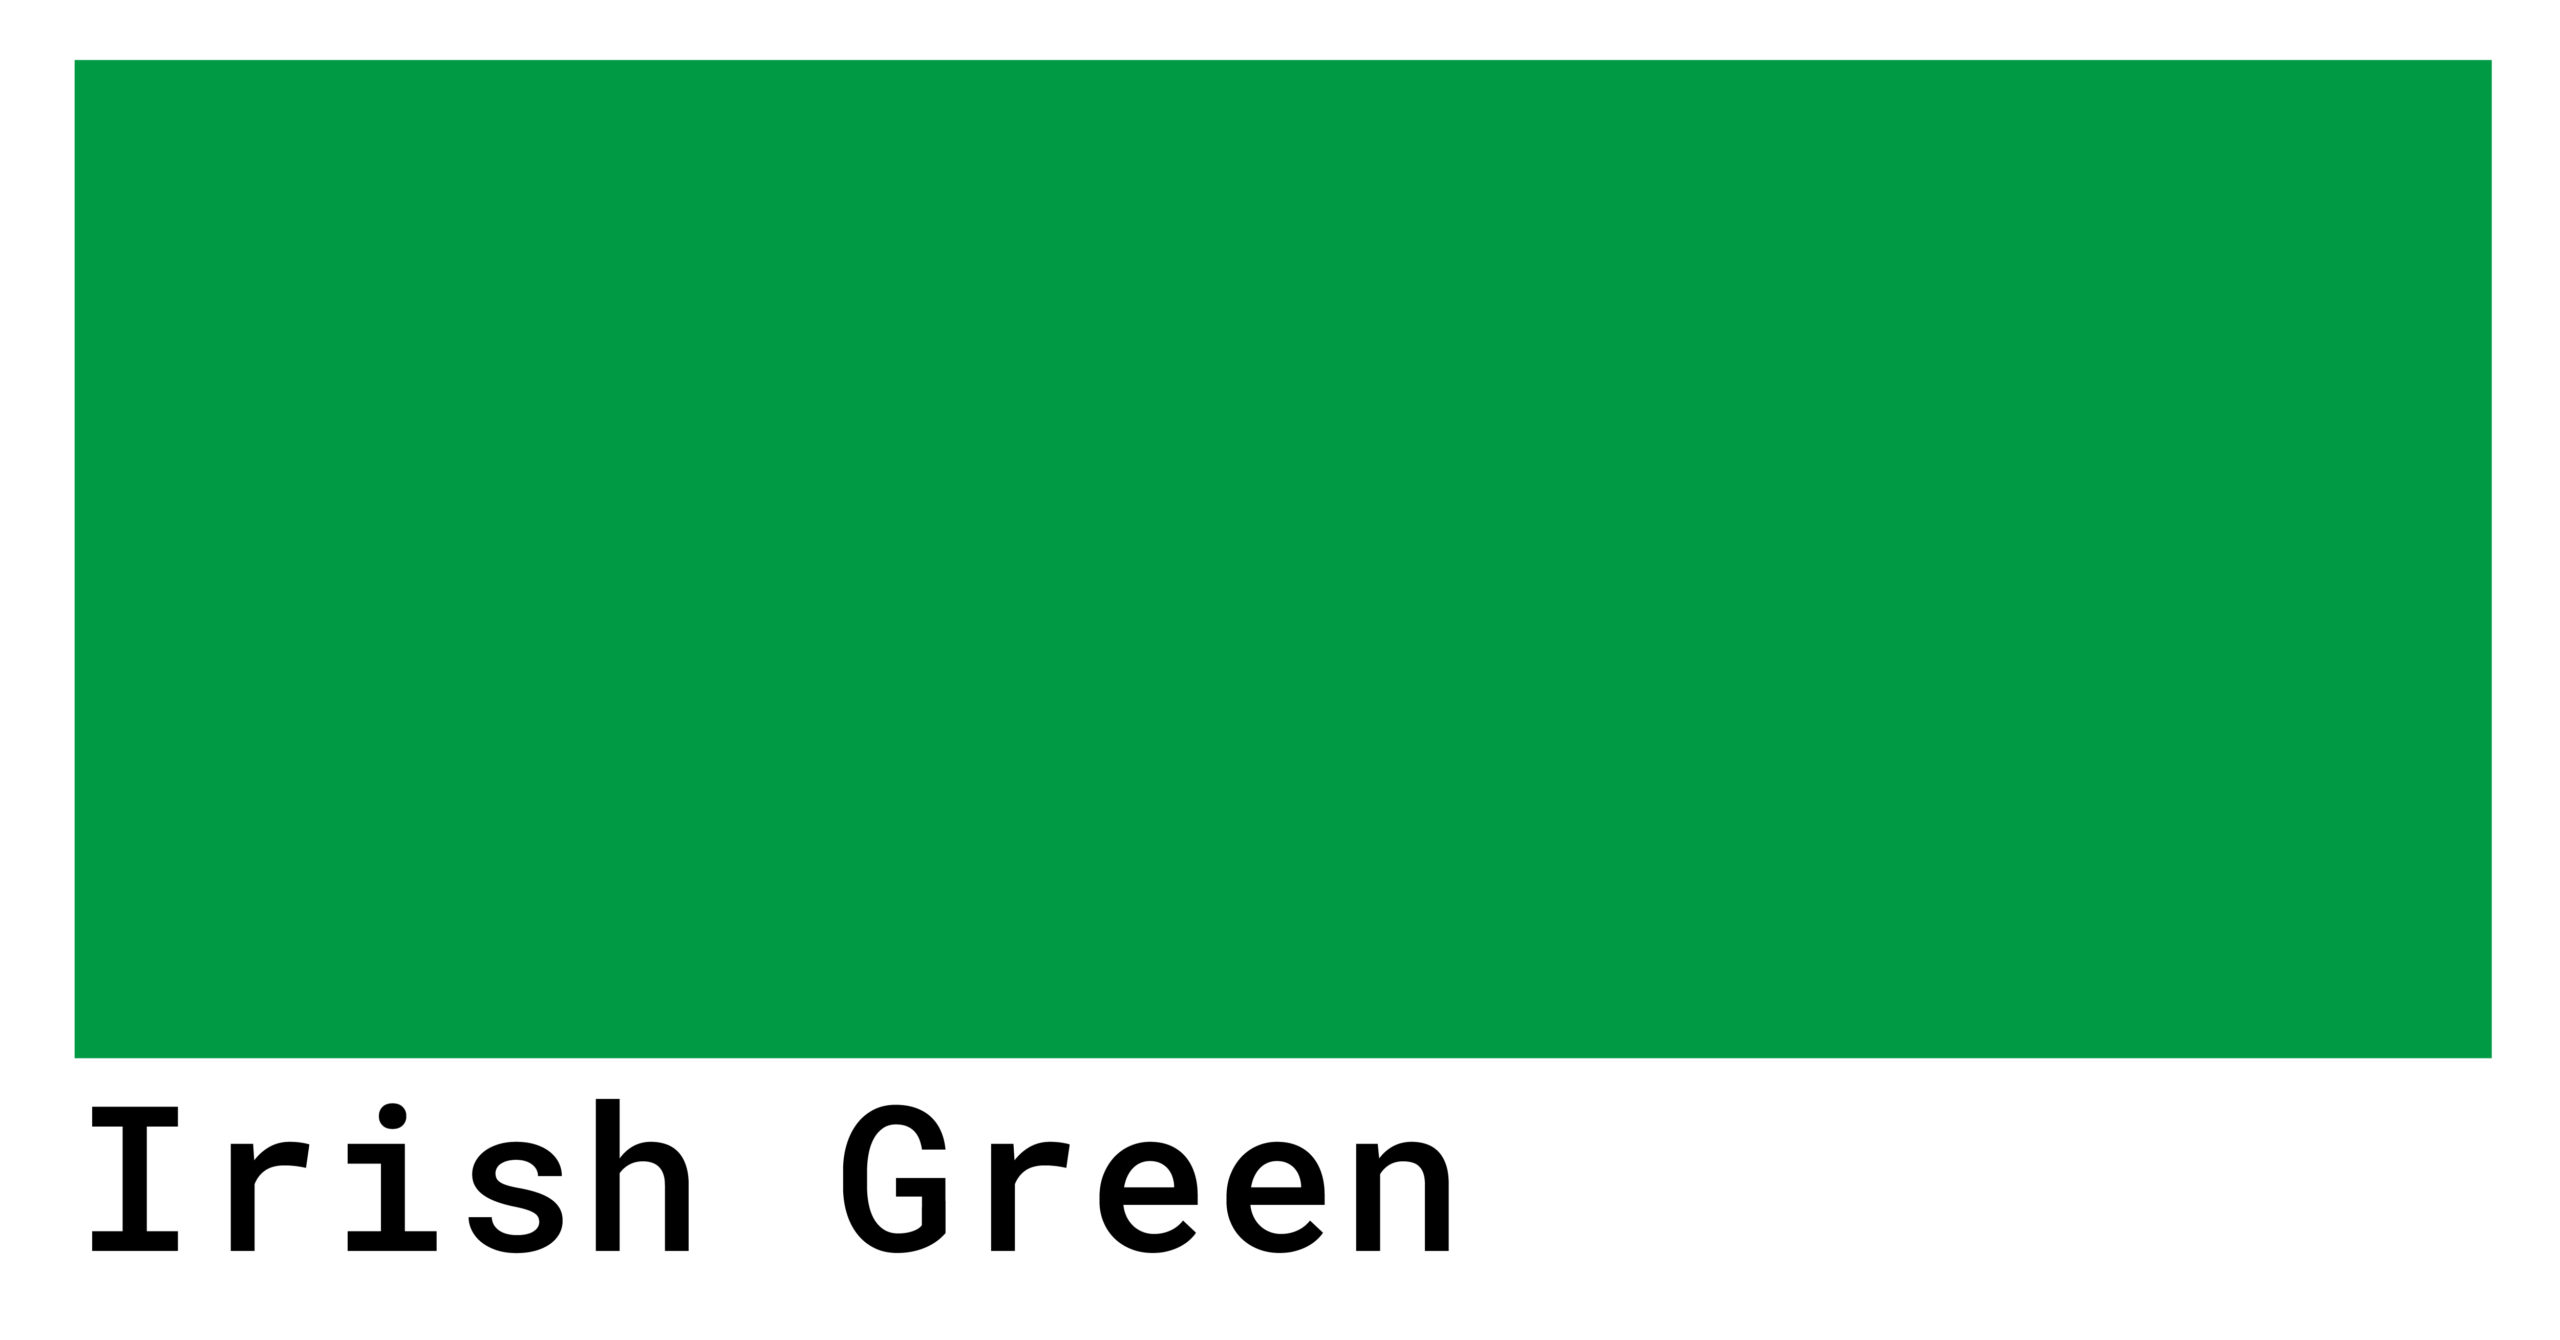 Irish Green Color Codes   The Hex, RGB and CMYK Values That You Need